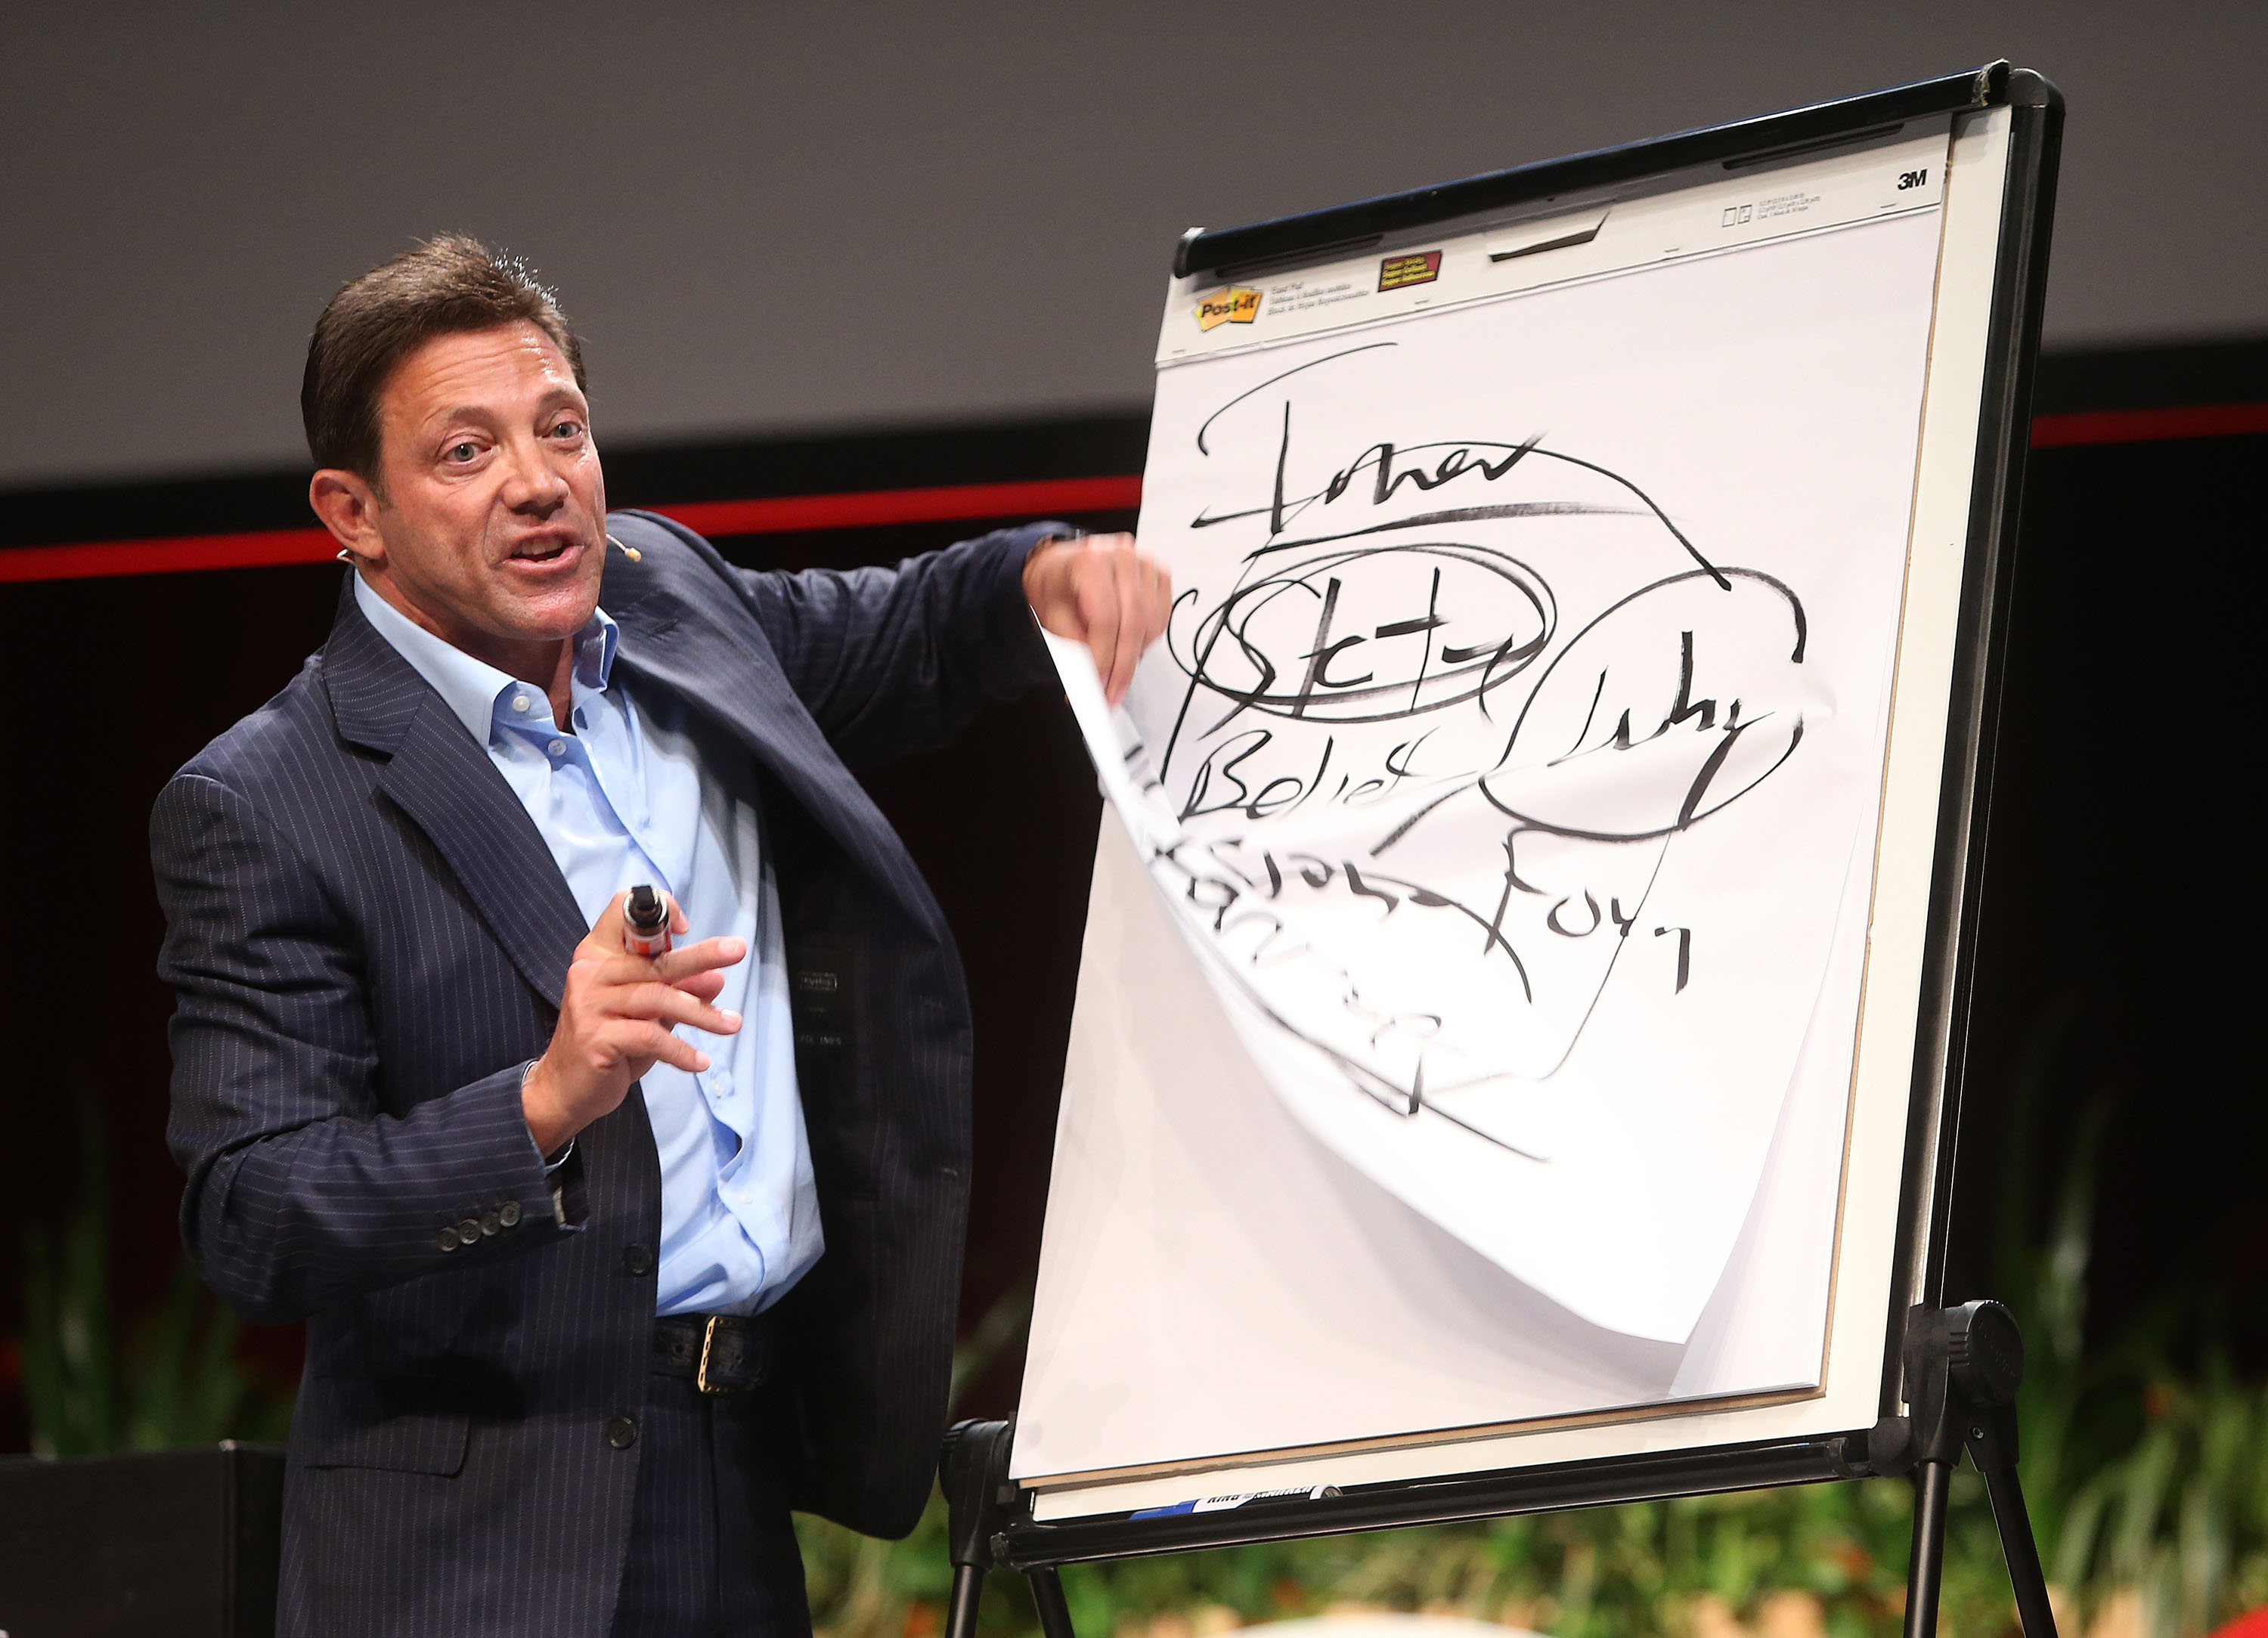 Motivational speaker Jordan Belfort speaks on 'The Art of Prospecting' at a real estate agents' conference at the Gold Coast Convention Centre on June 1, 2014 on the Gold Coast, Australia. (Newspix—Newspix via Getty Images)